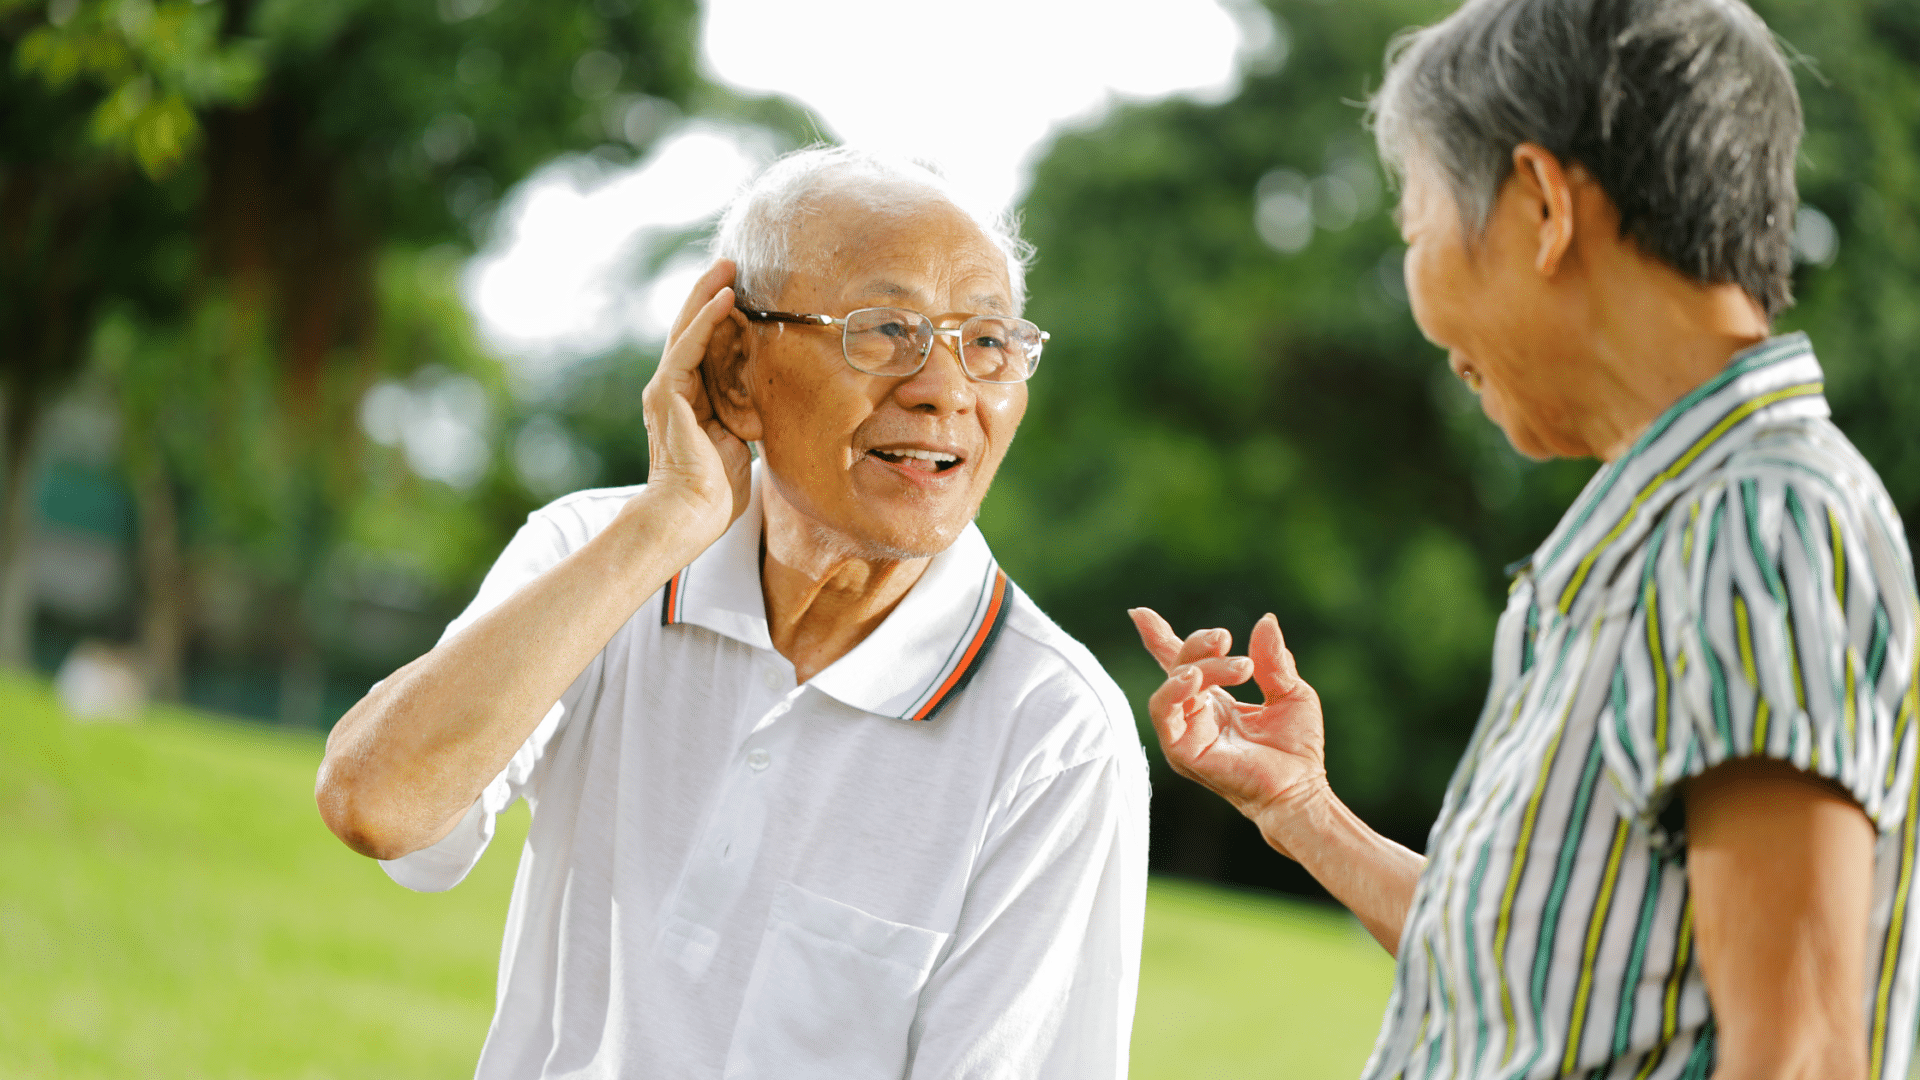 man speaking to someone with hearing loss